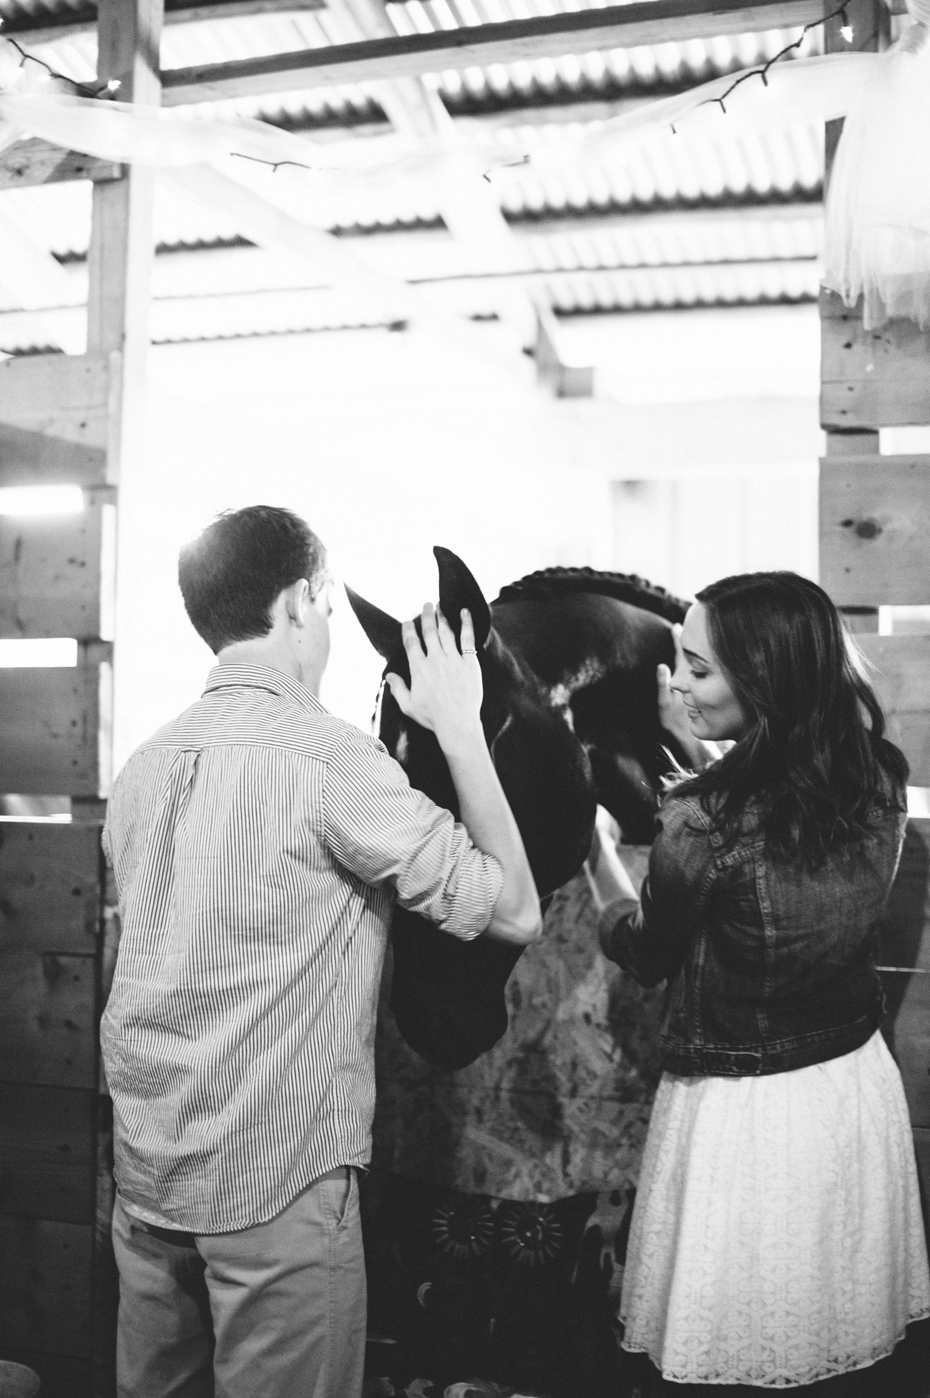 A couple meets a horse during their engagement session at the Saint Clair County 4h fair by photographer Heather Jowett.